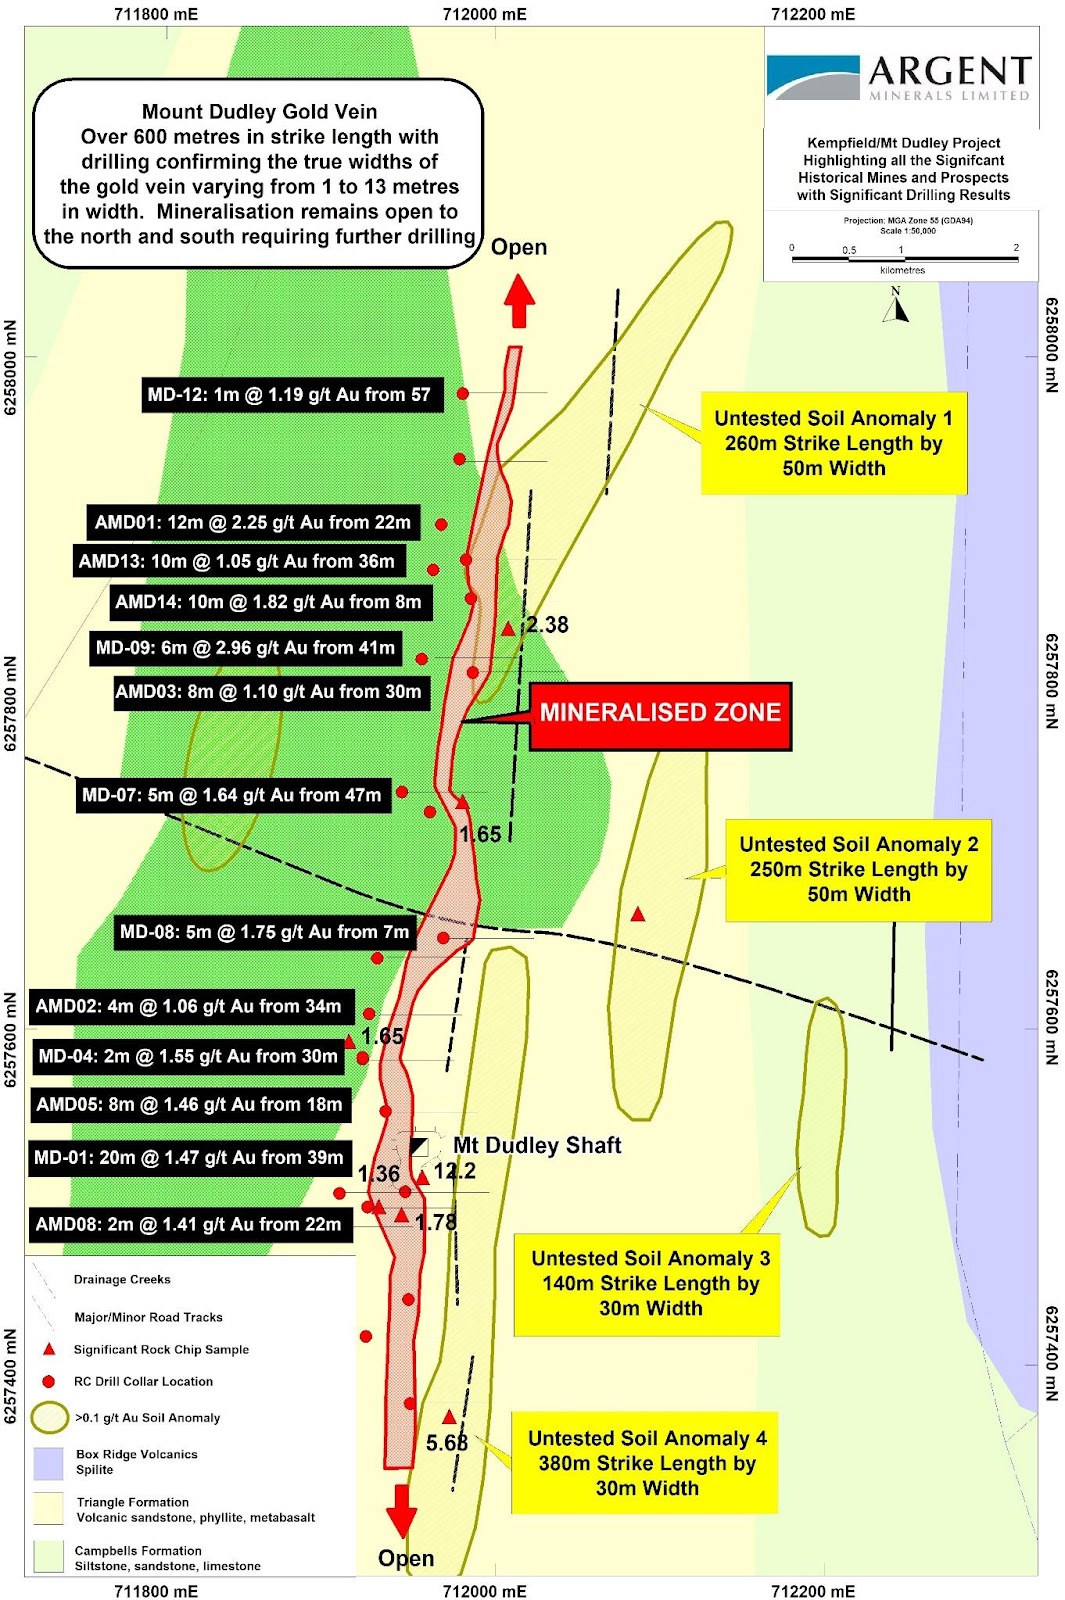 Drill Plan highlighting all Historic and Current Drillholes with significant Gold Intercepts